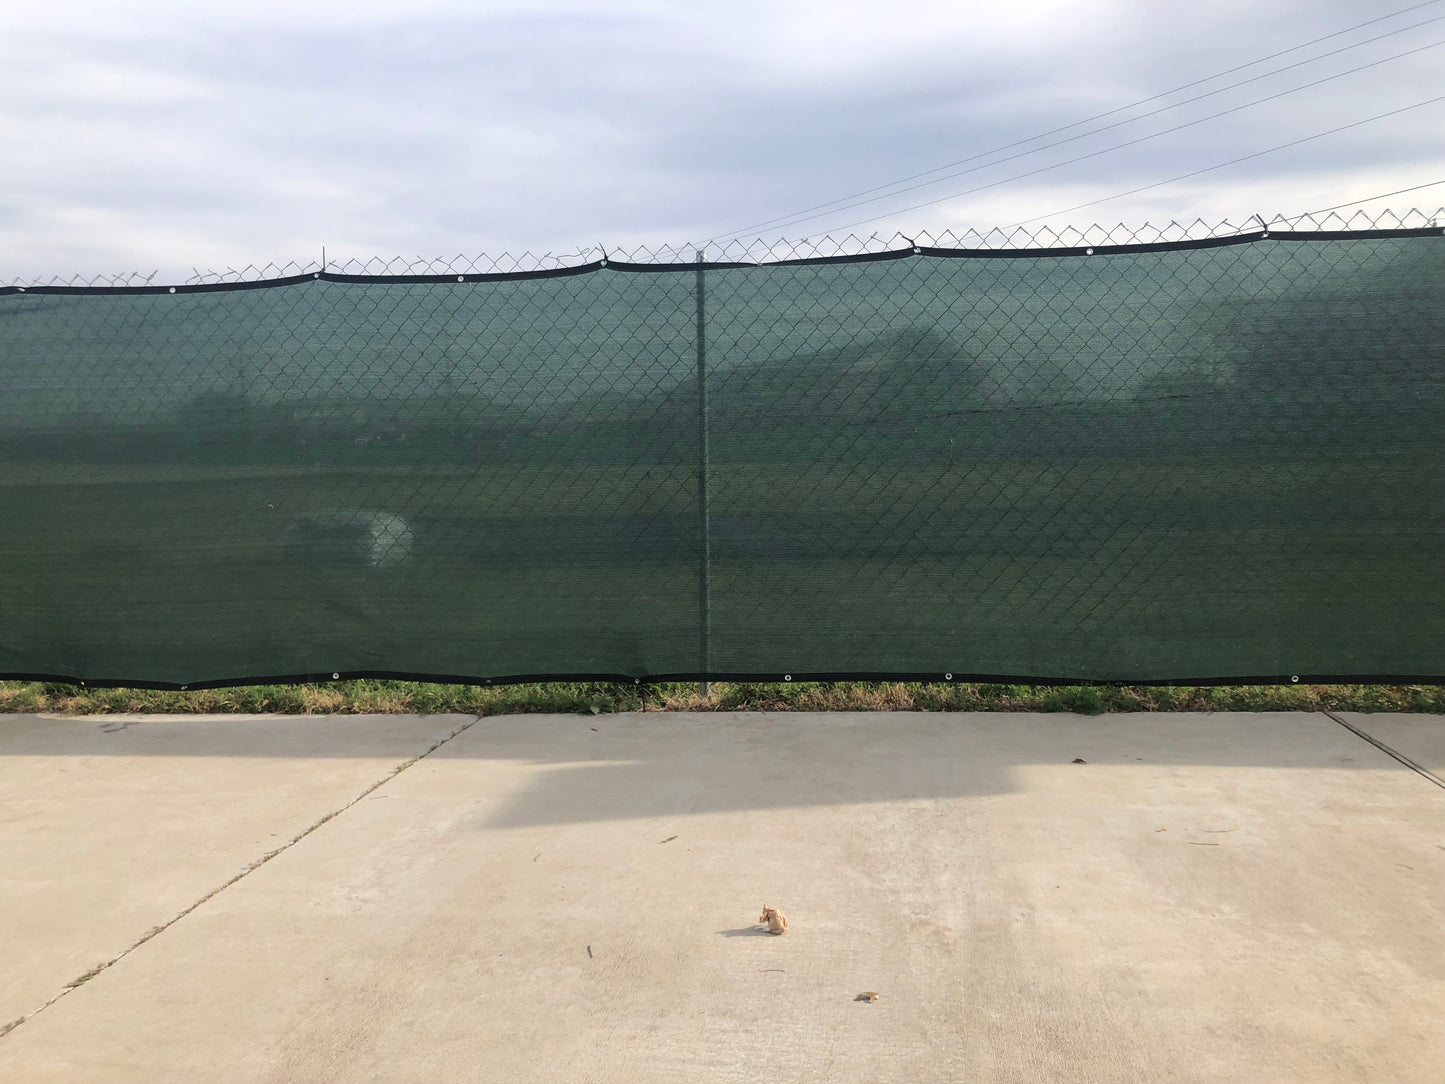 90% Green Privacy Fence 8' x 50'